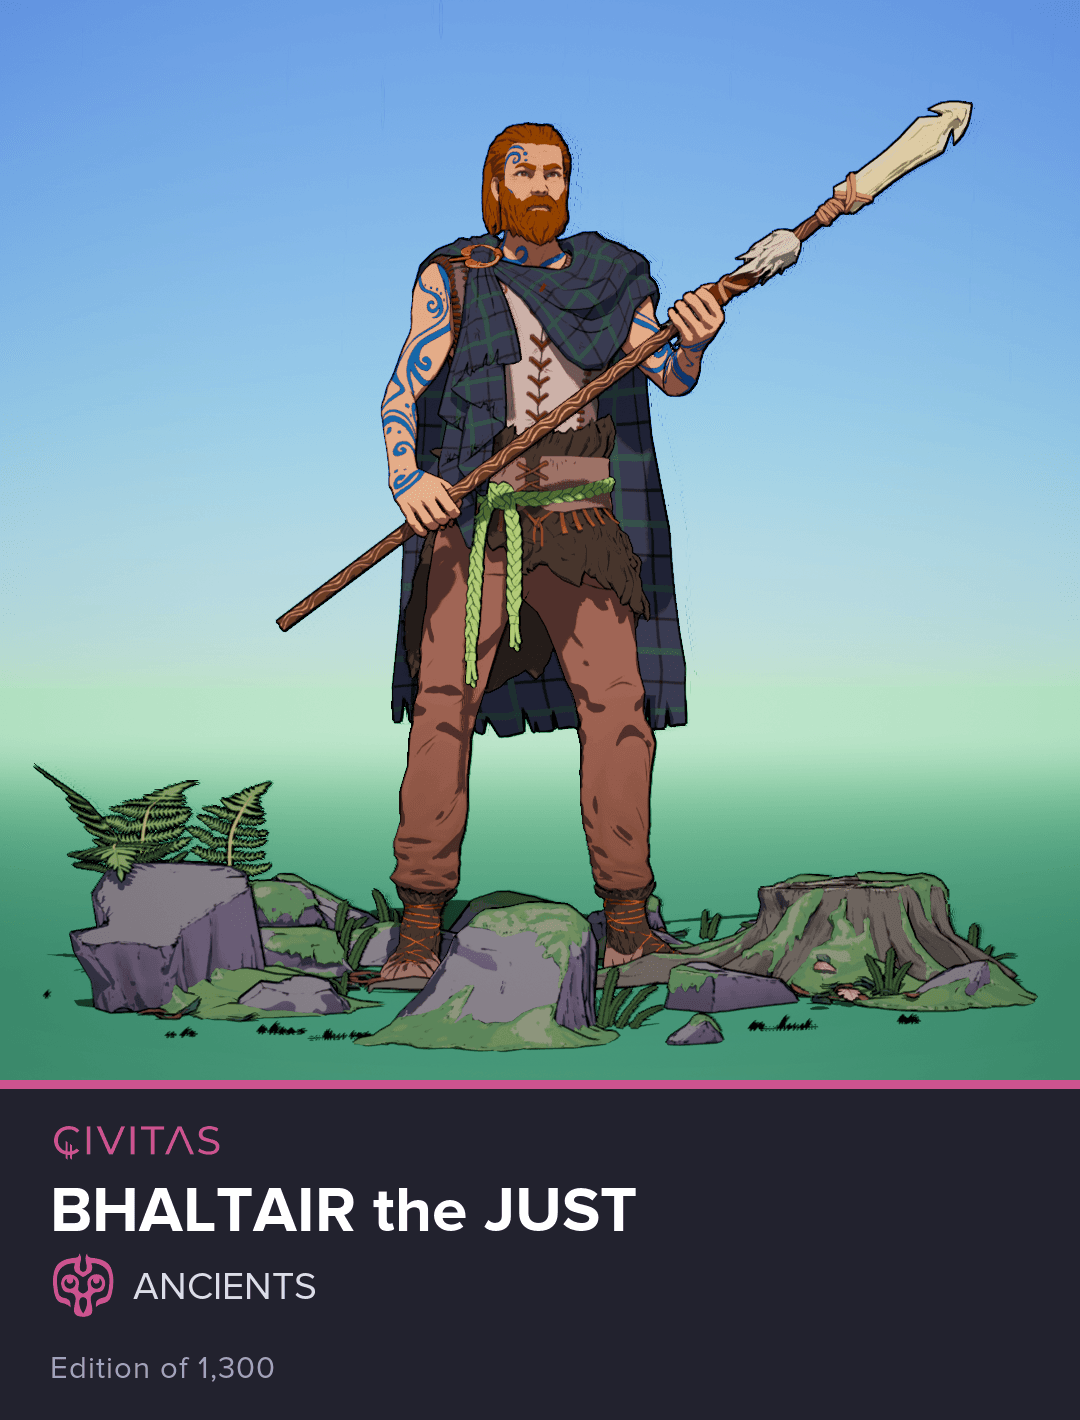 Bhaltair the Just #612